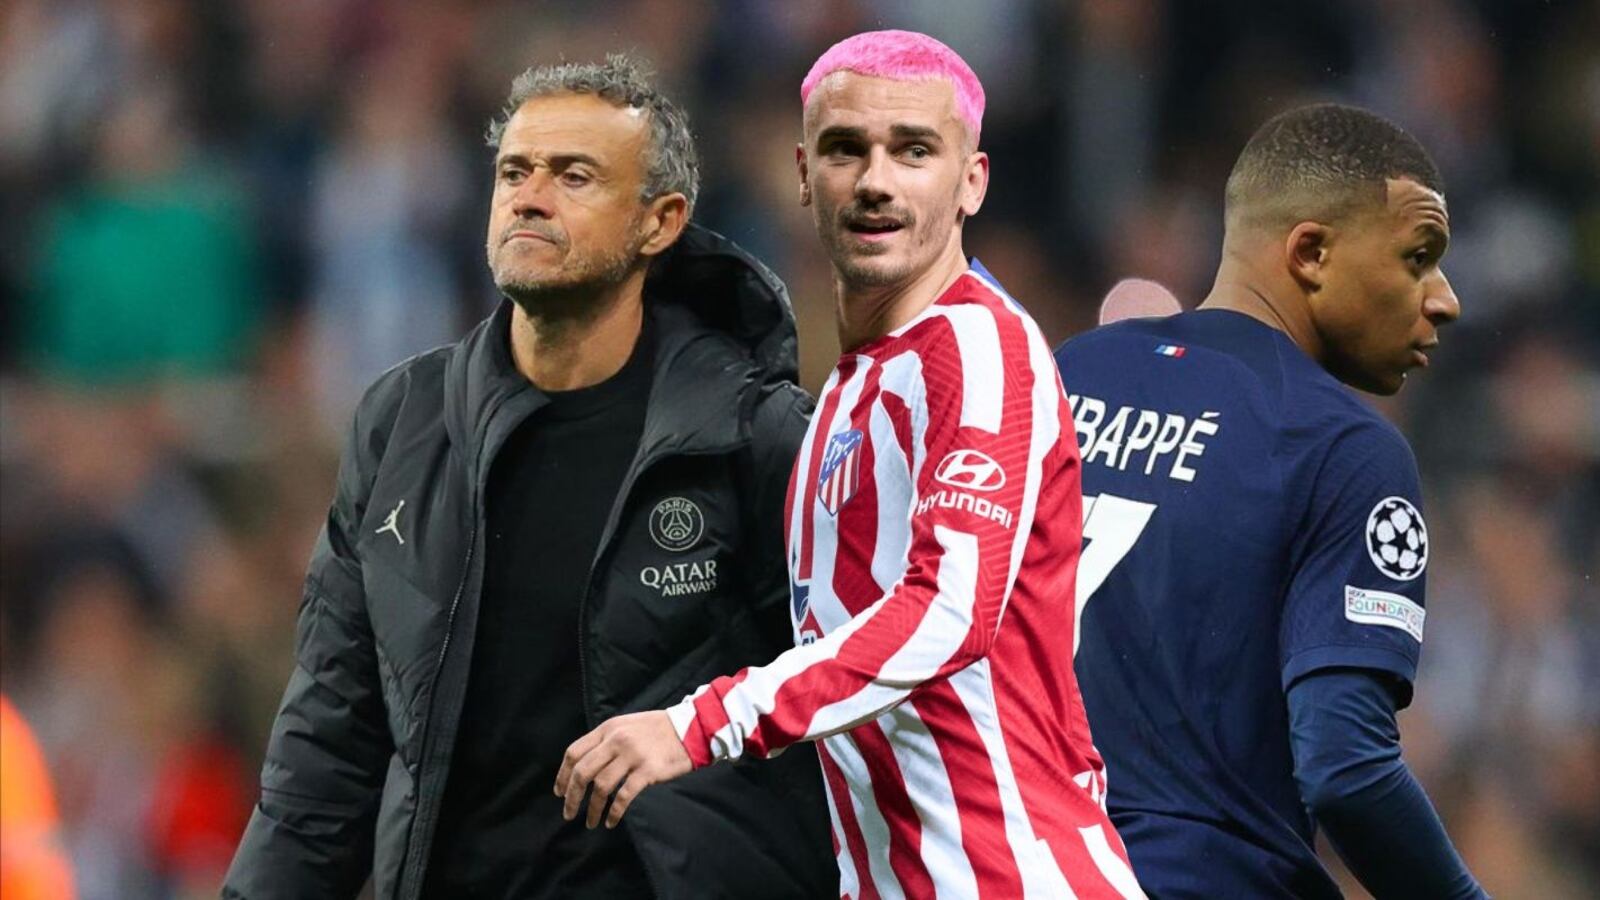 They are desperate, the player that PSG offered to Atlético to sign Griezmann